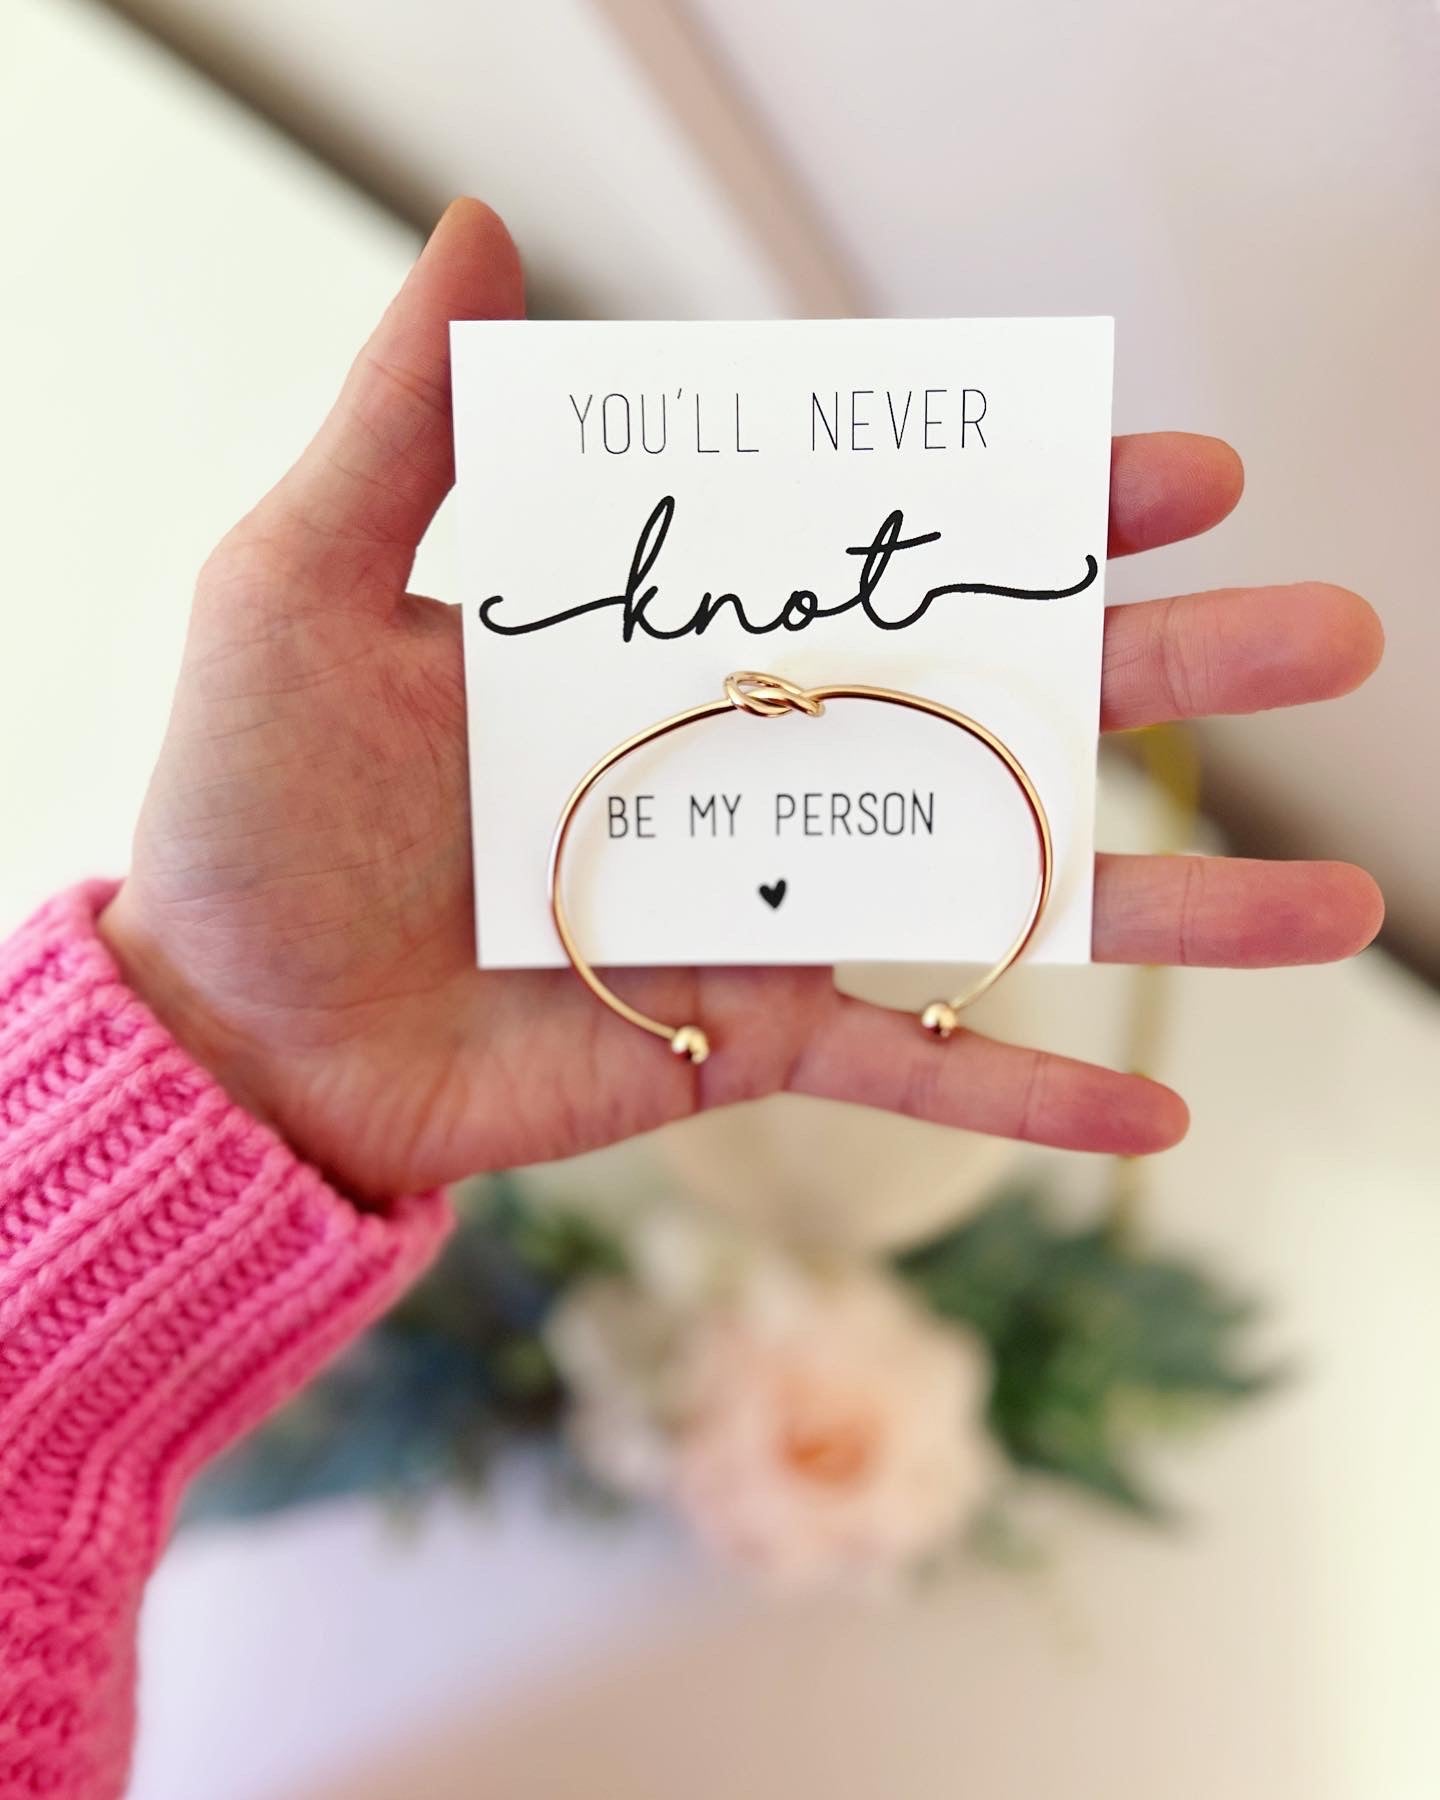 You'll never KNOT be my person knot bangle!